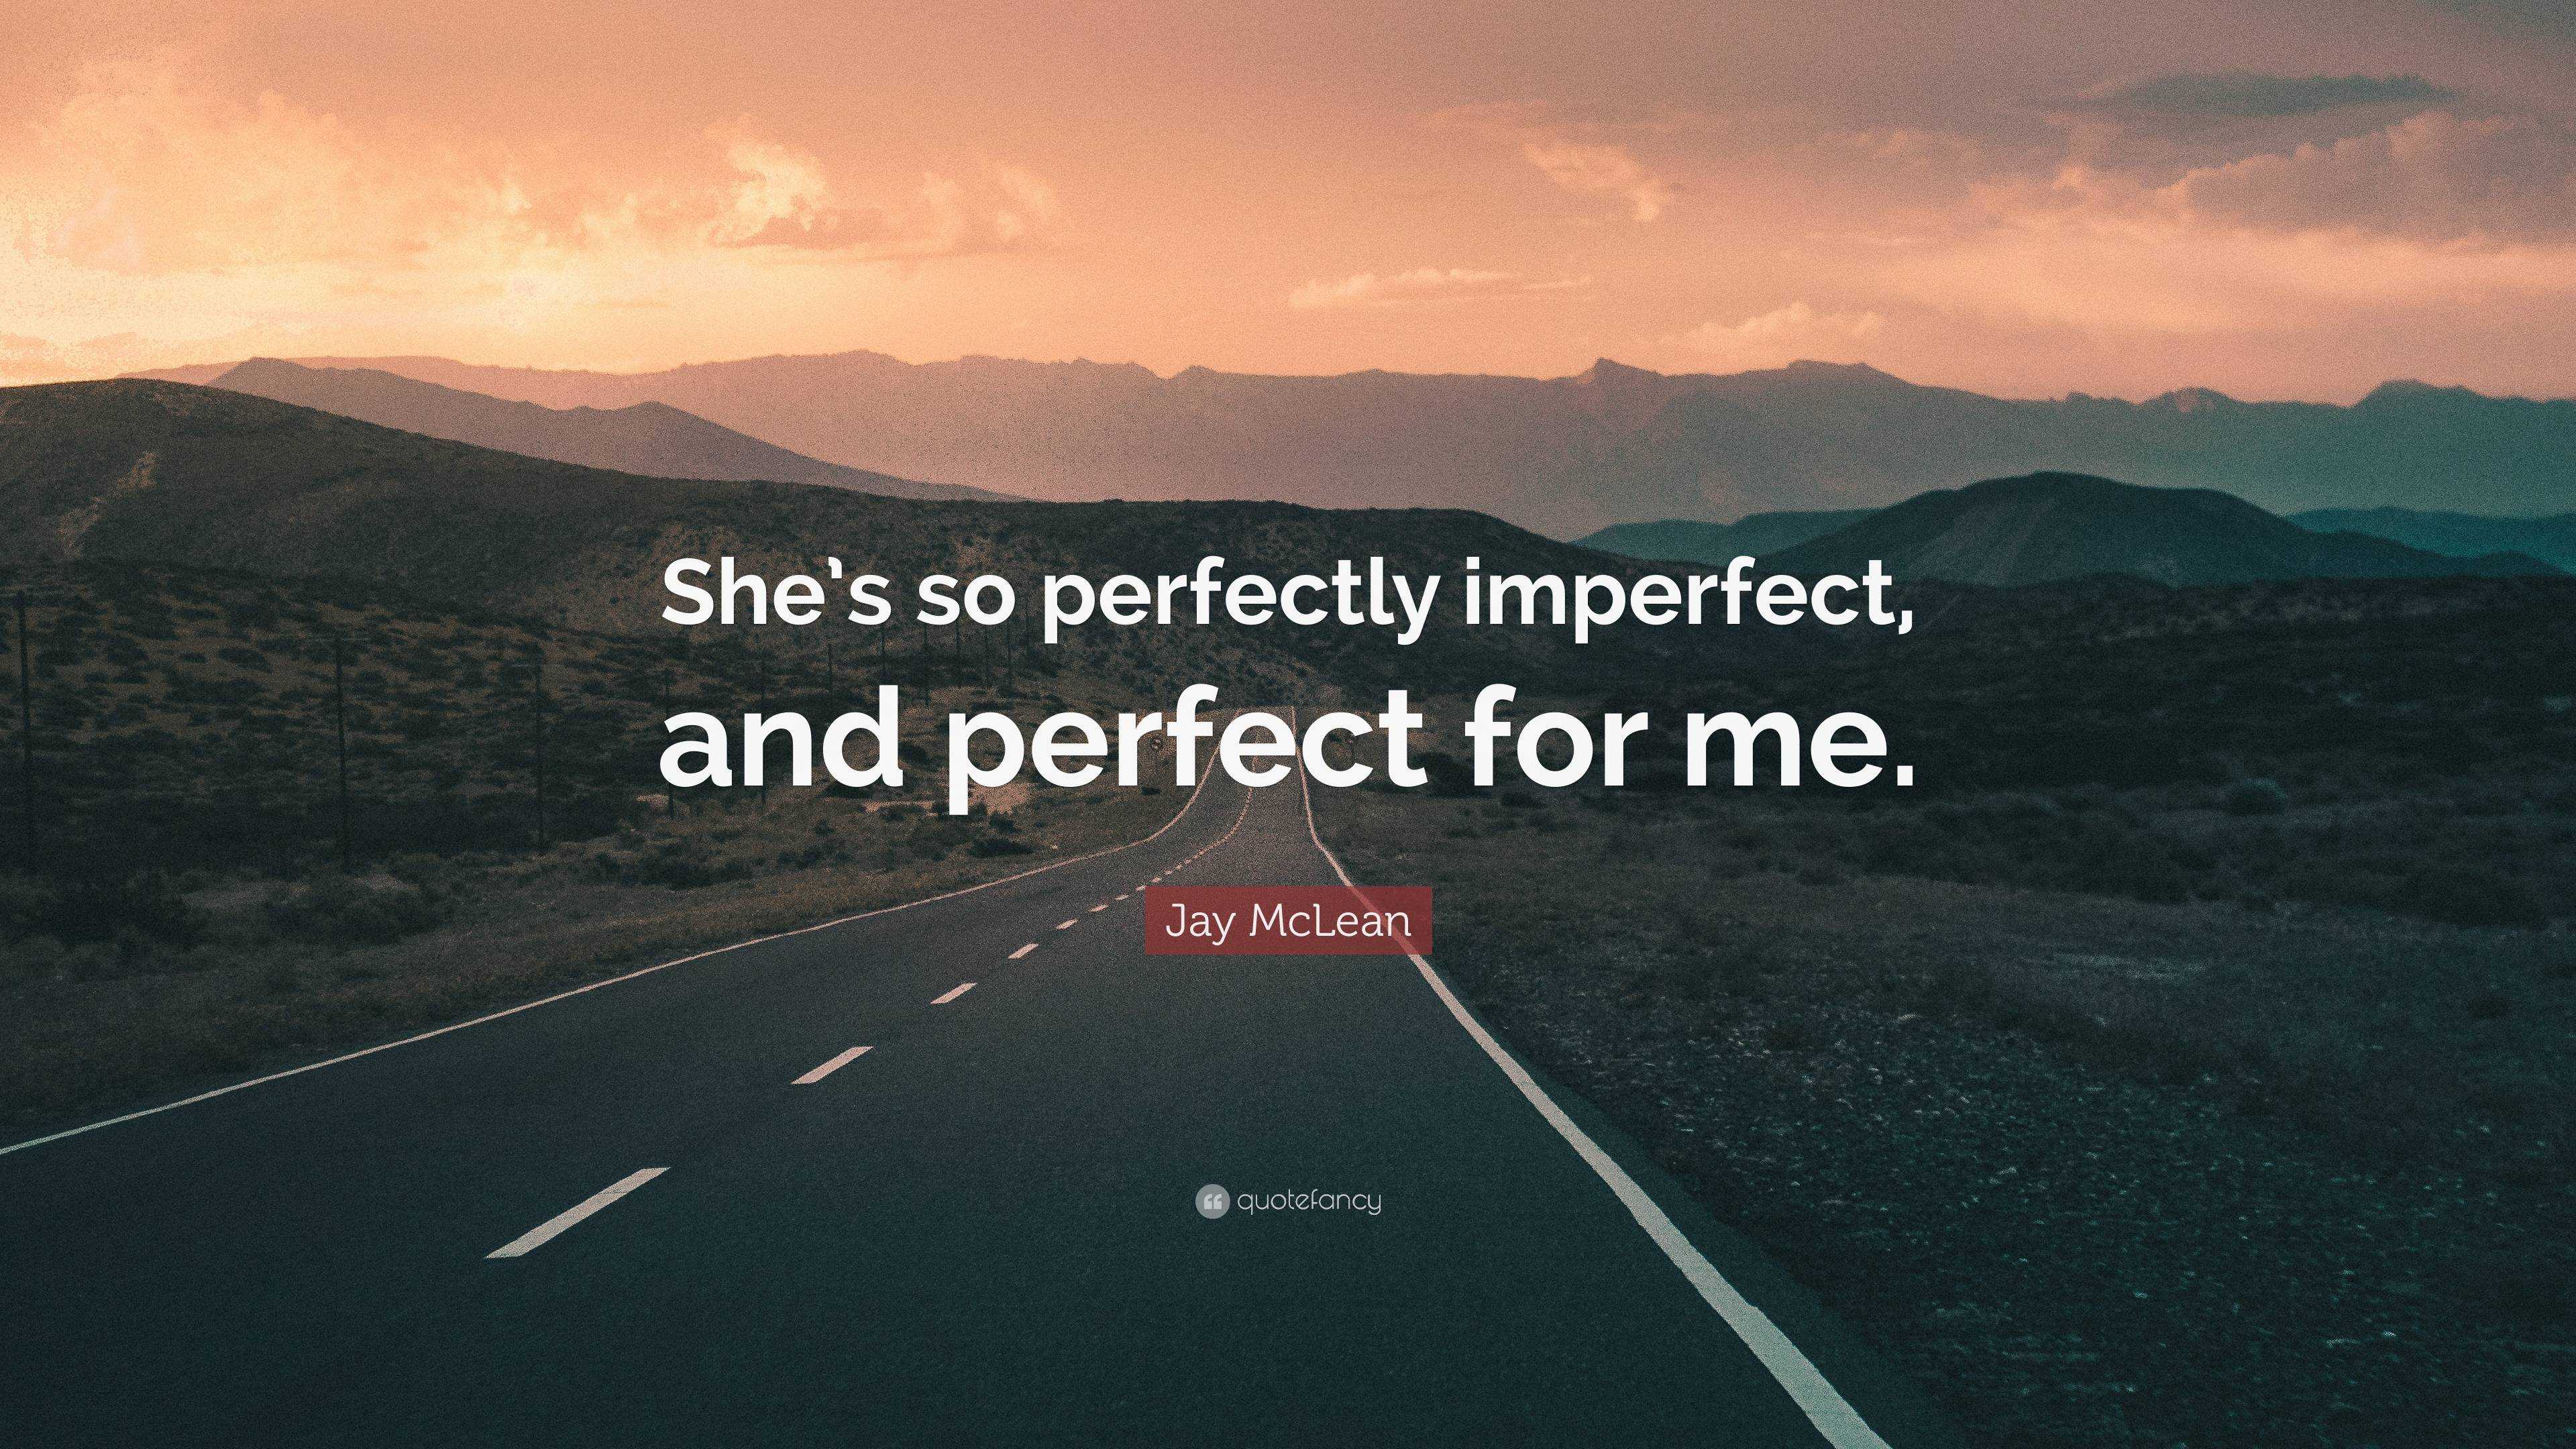 https://quotefancy.com/media/wallpaper/3840x2160/6505898-Jay-McLean-Quote-She-s-so-perfectly-imperfect-and-perfect-for-me.jpg